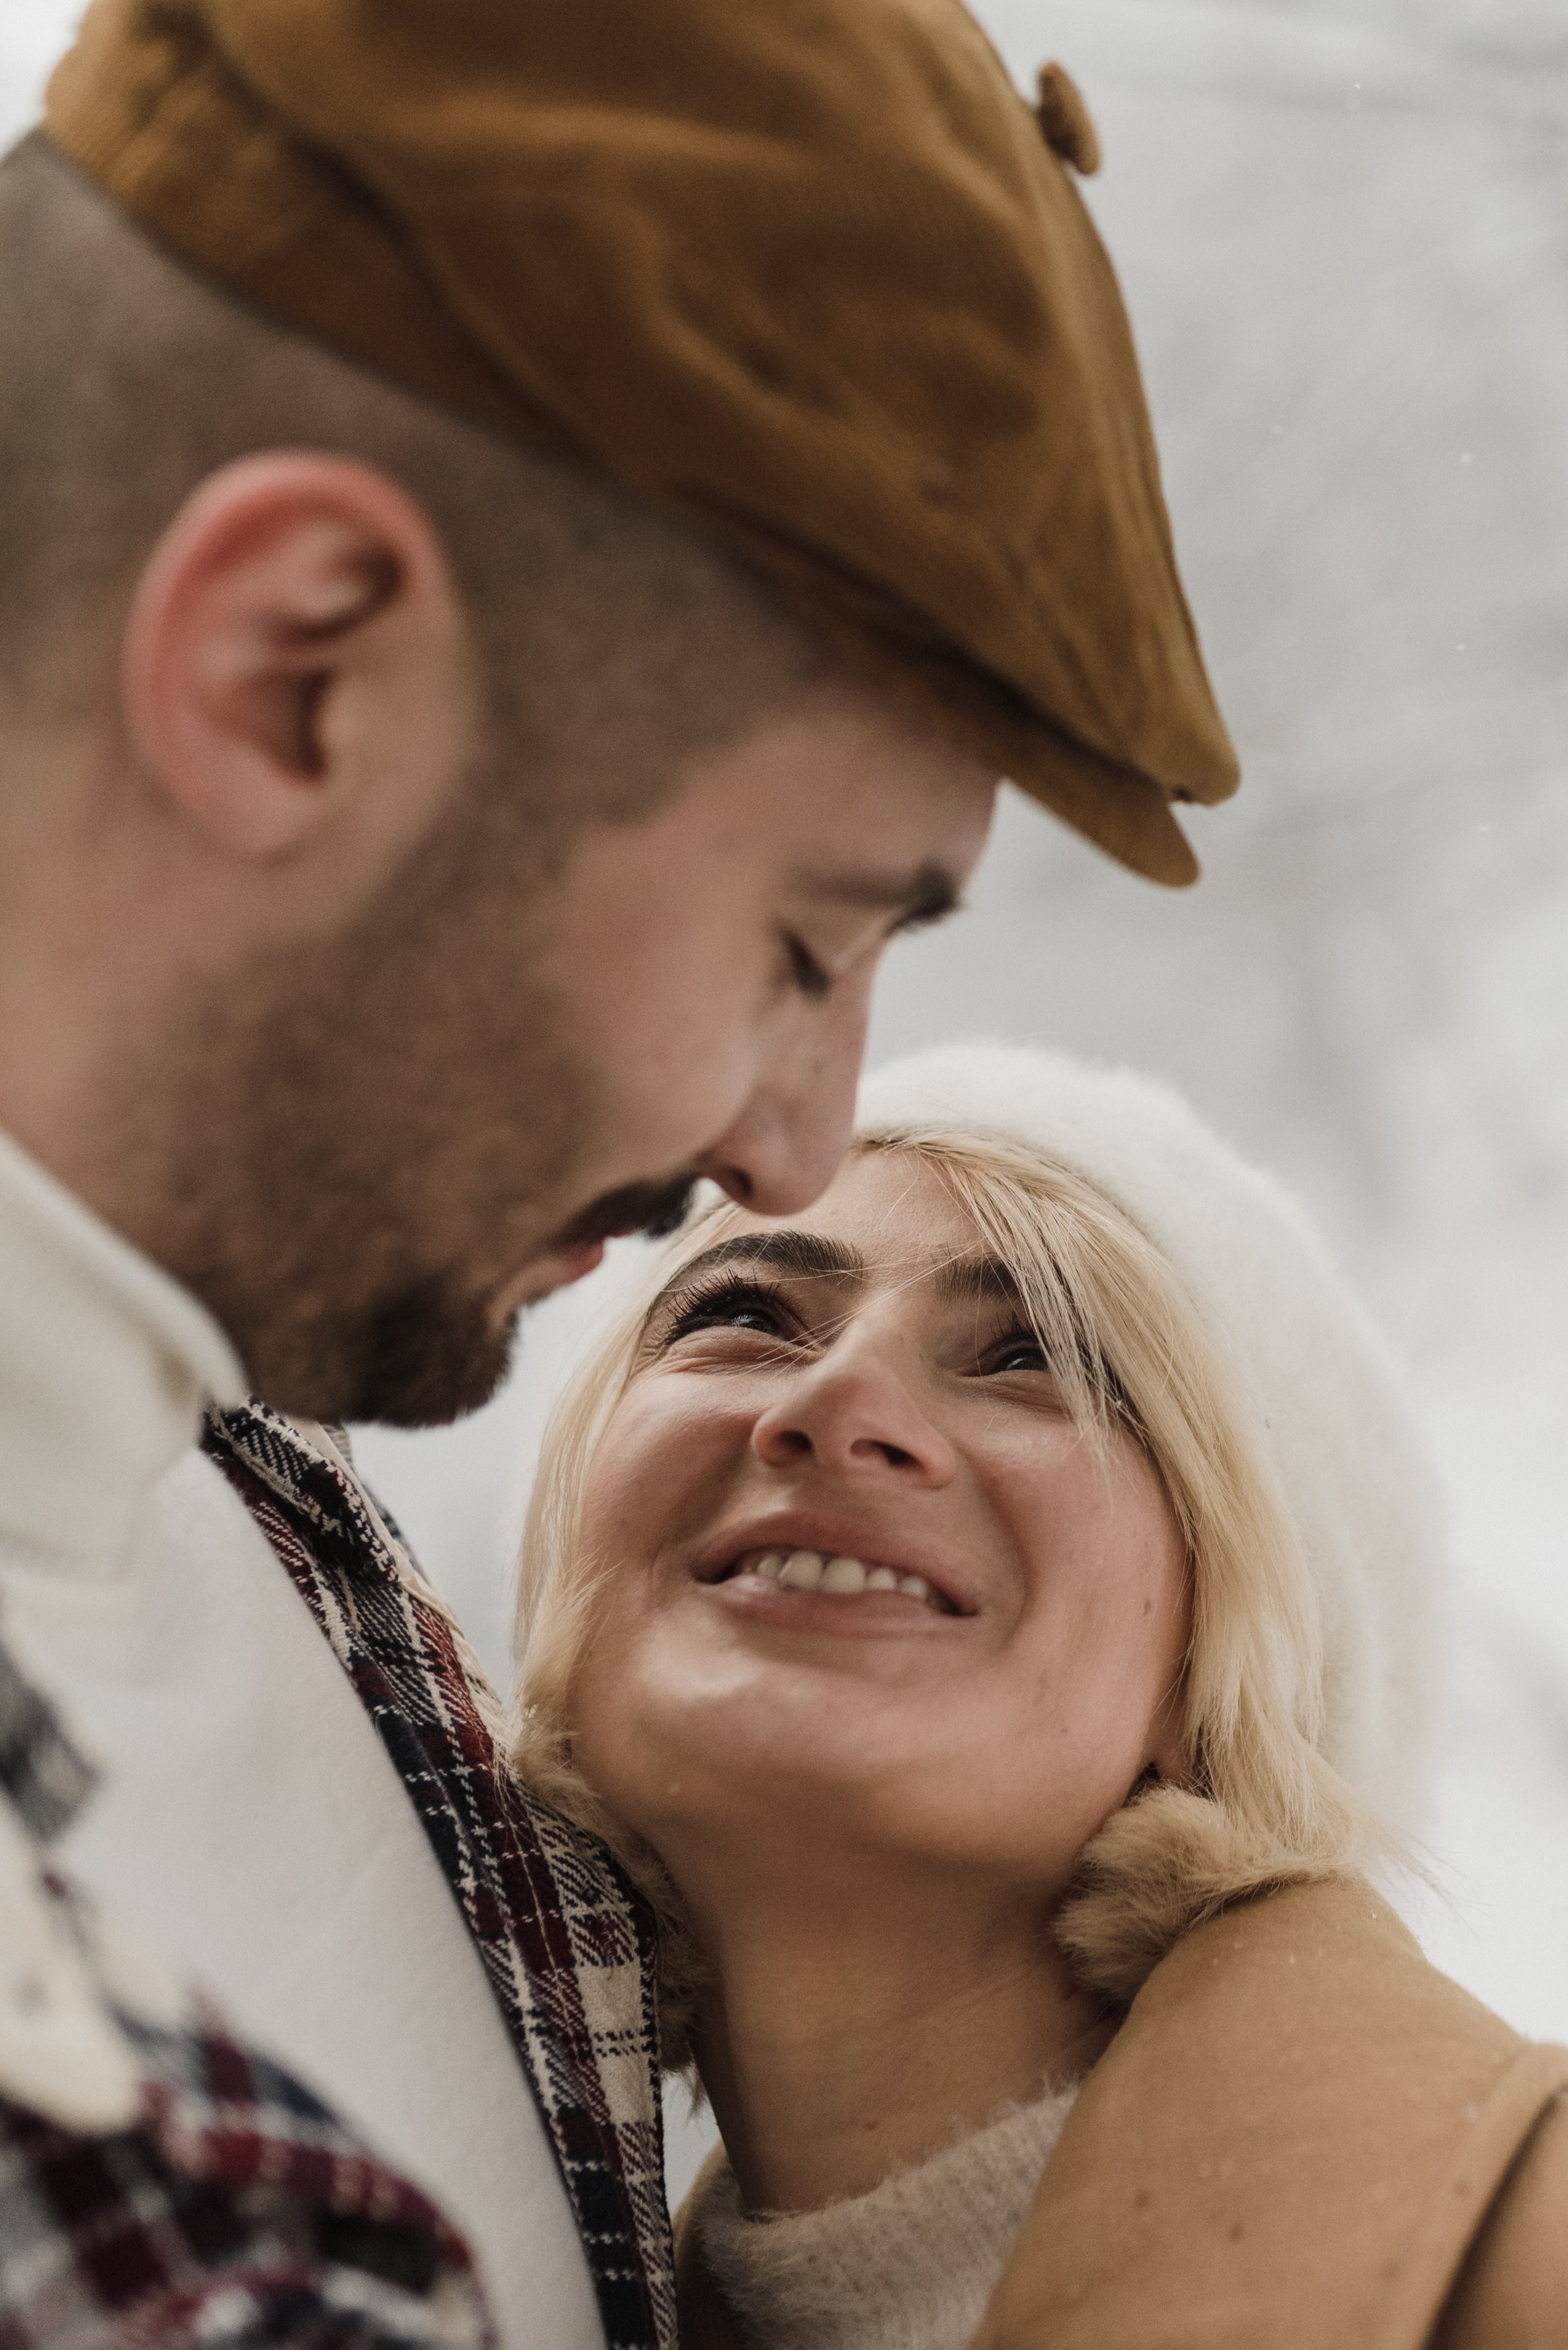 Couple looking lovingly at each other | Source: Pexels